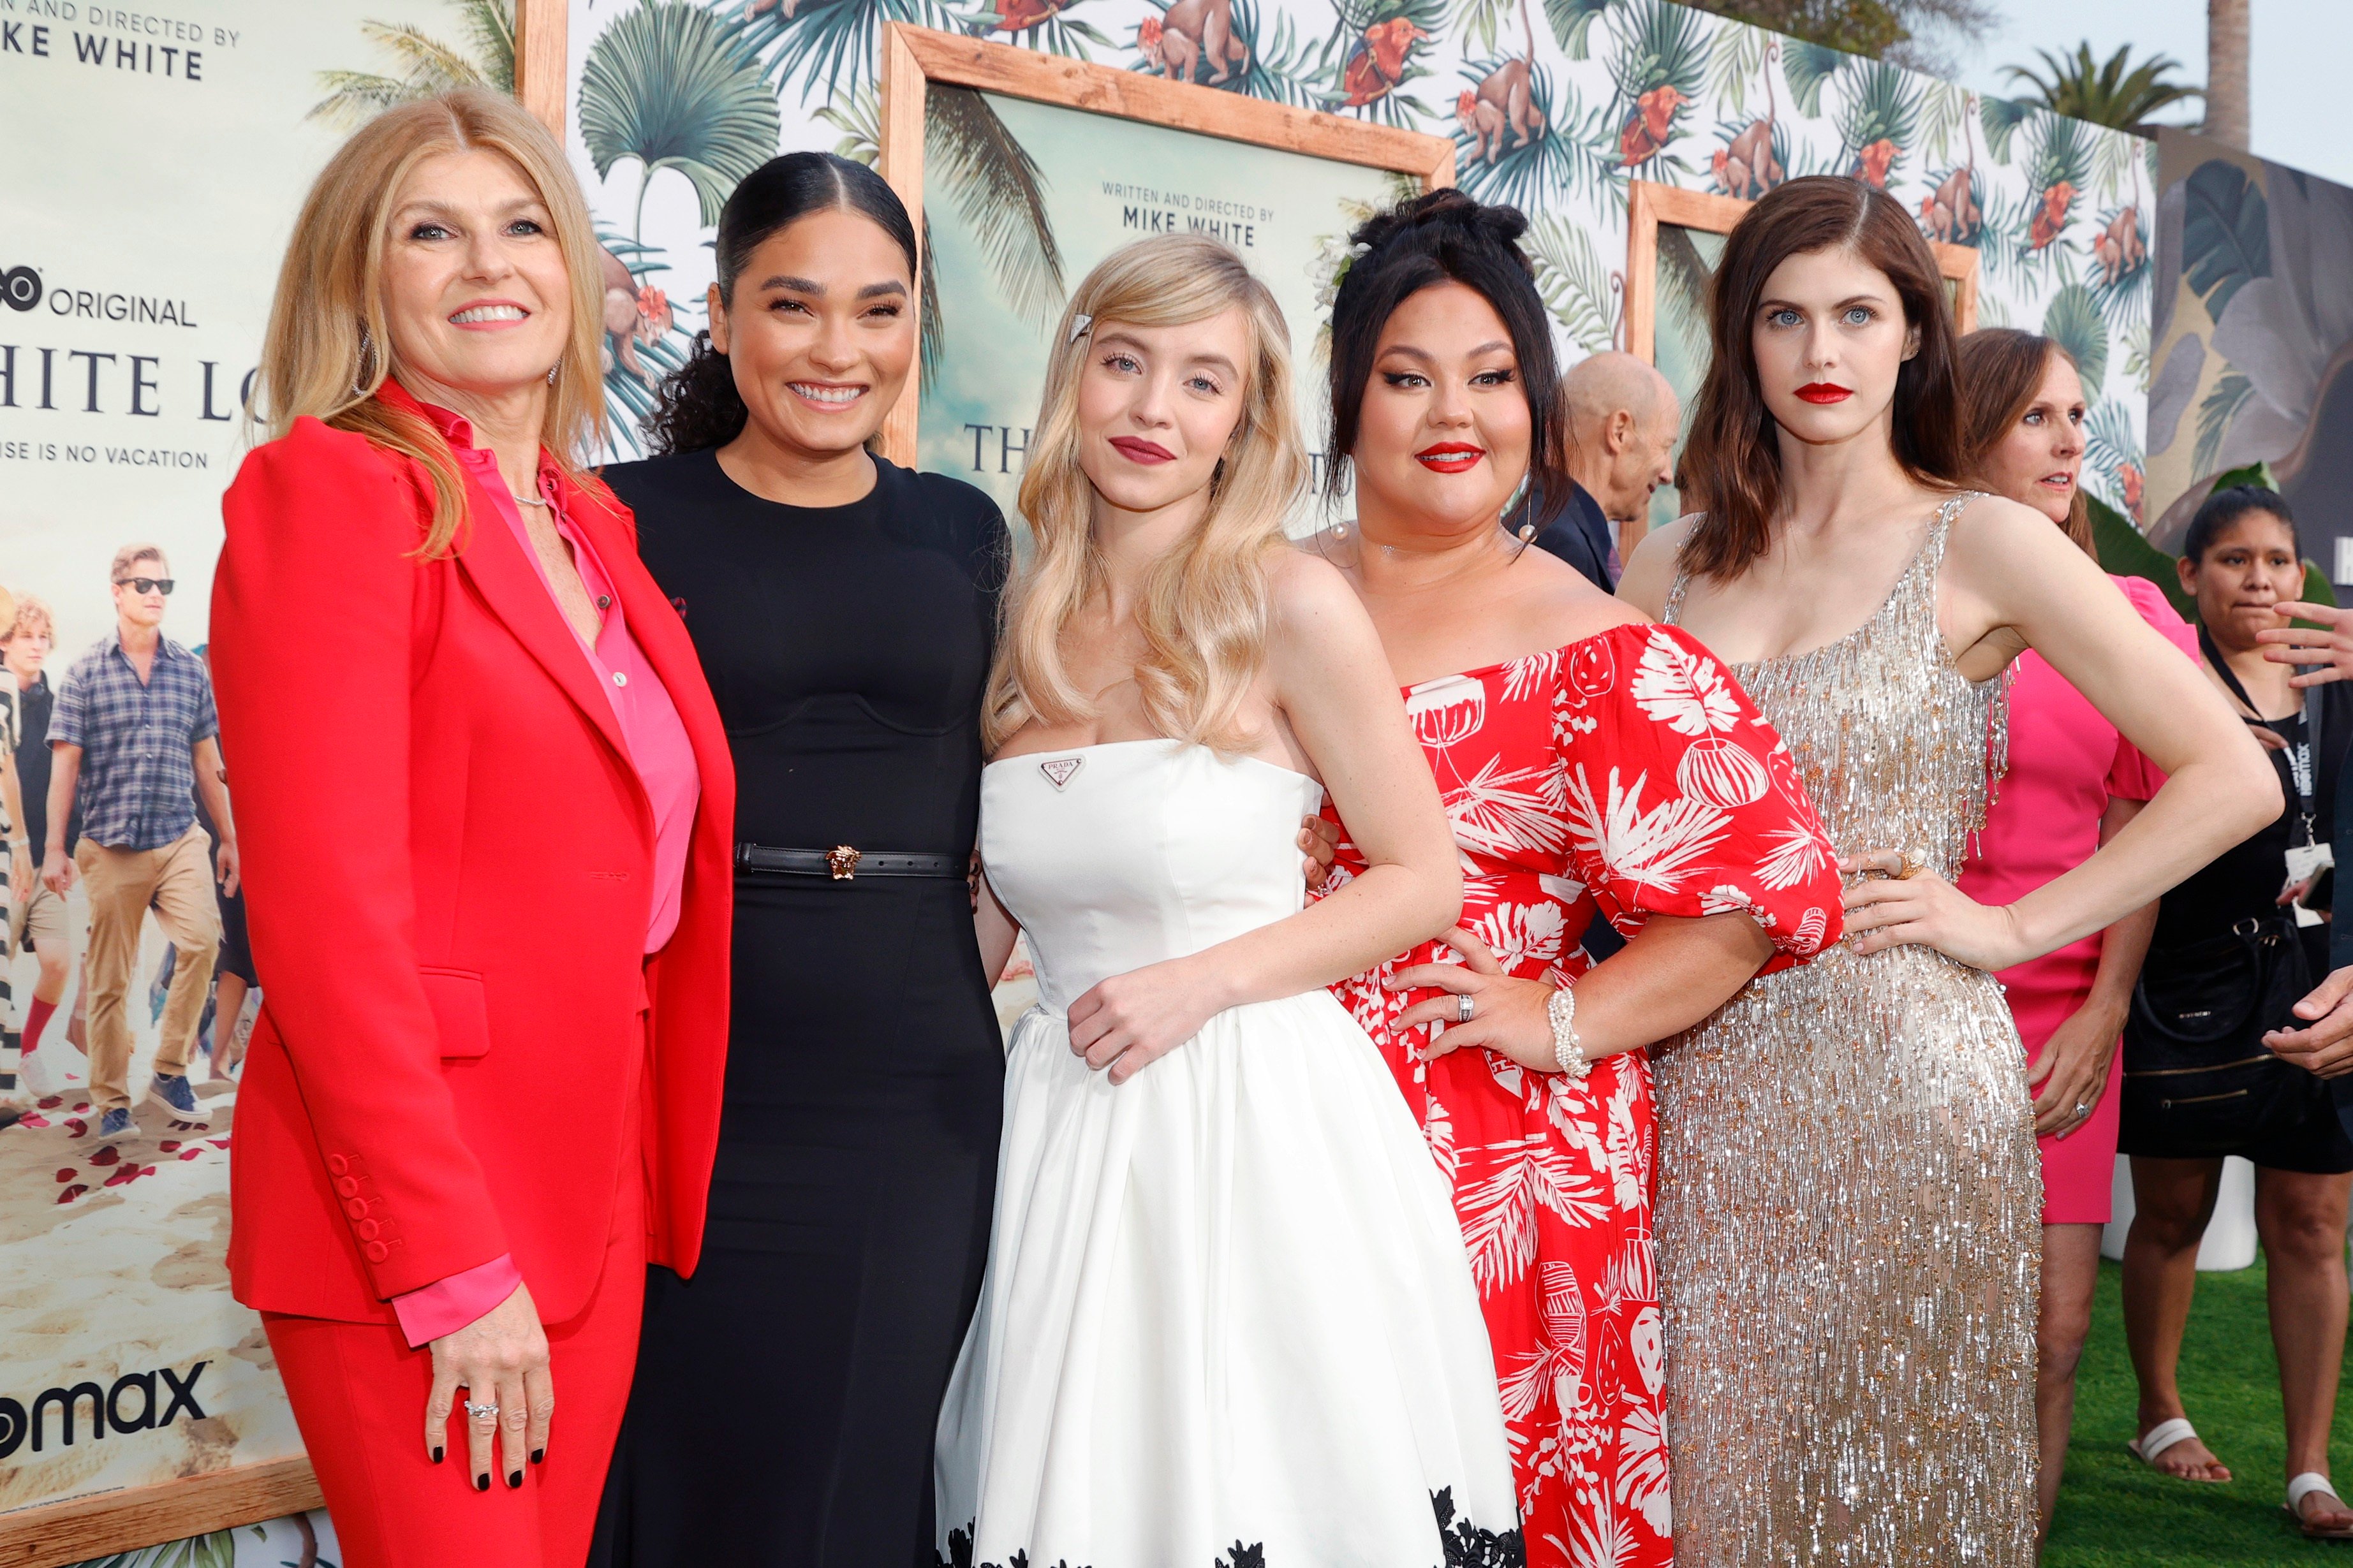 Some of The White Lotus Episode 1 cast posing for photographers at the Los Angeles Premiere: Connie Britton, Brittany O'Grady, Sydney Sweeney, Jolene Purdy, and Alexandra Daddario